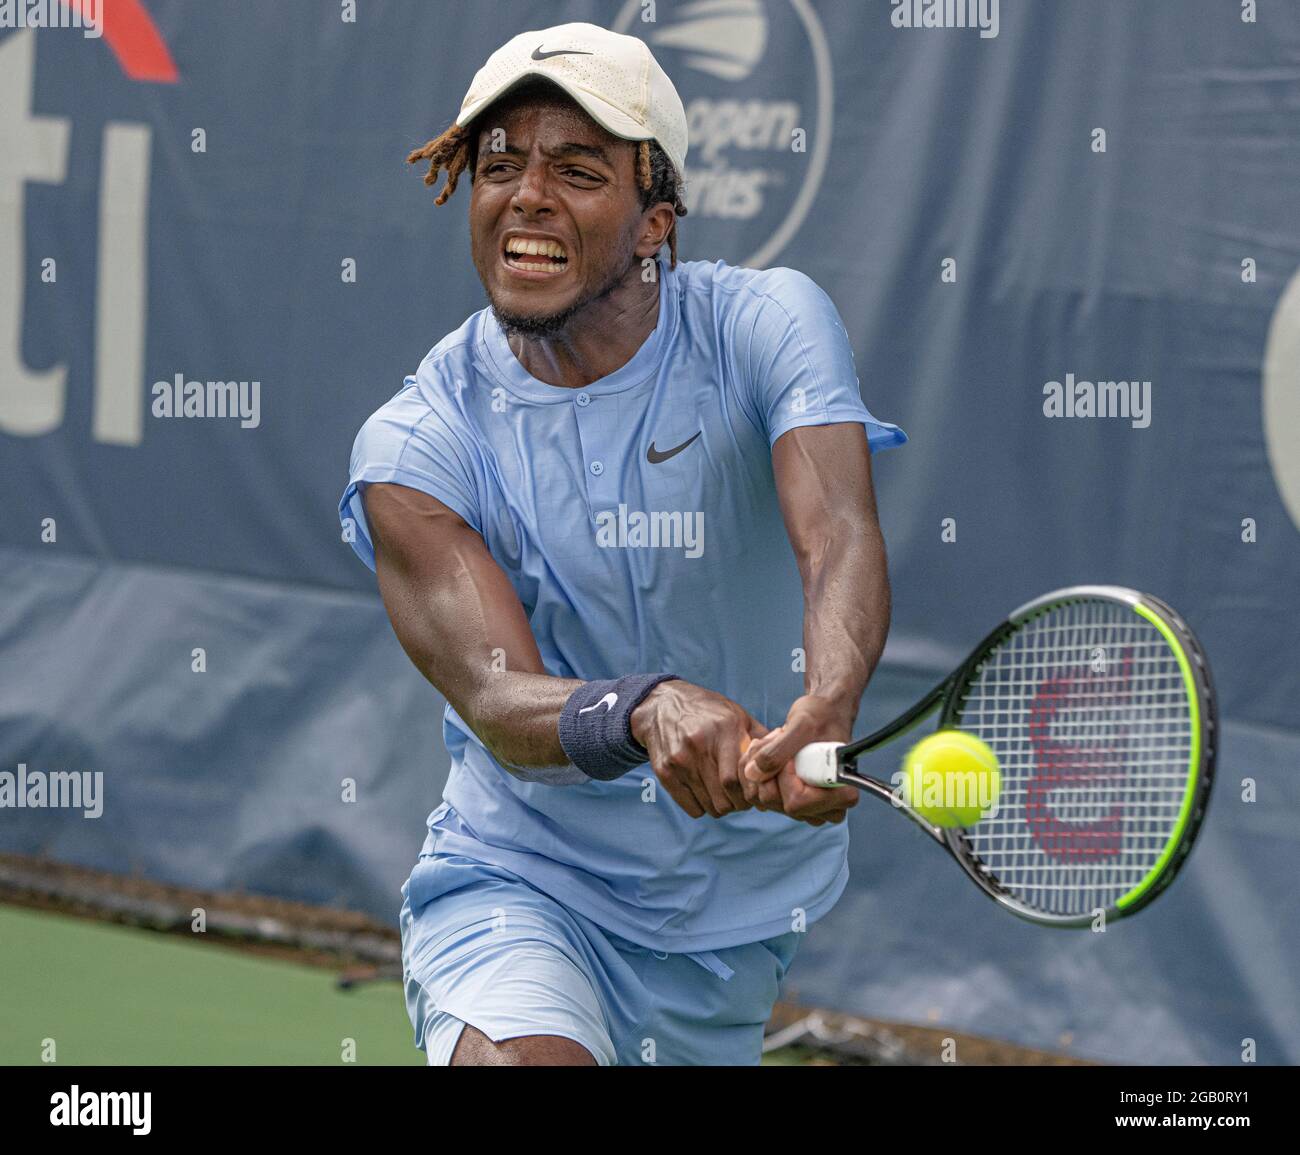 Washington, United States Of America. 06th Apr, 2017. 25 year old Swedish  tennis player Elias Ymer won his match against American Bjorn Fratangelo  6-4 6-3 on Saturday, July 31, 2021 at the